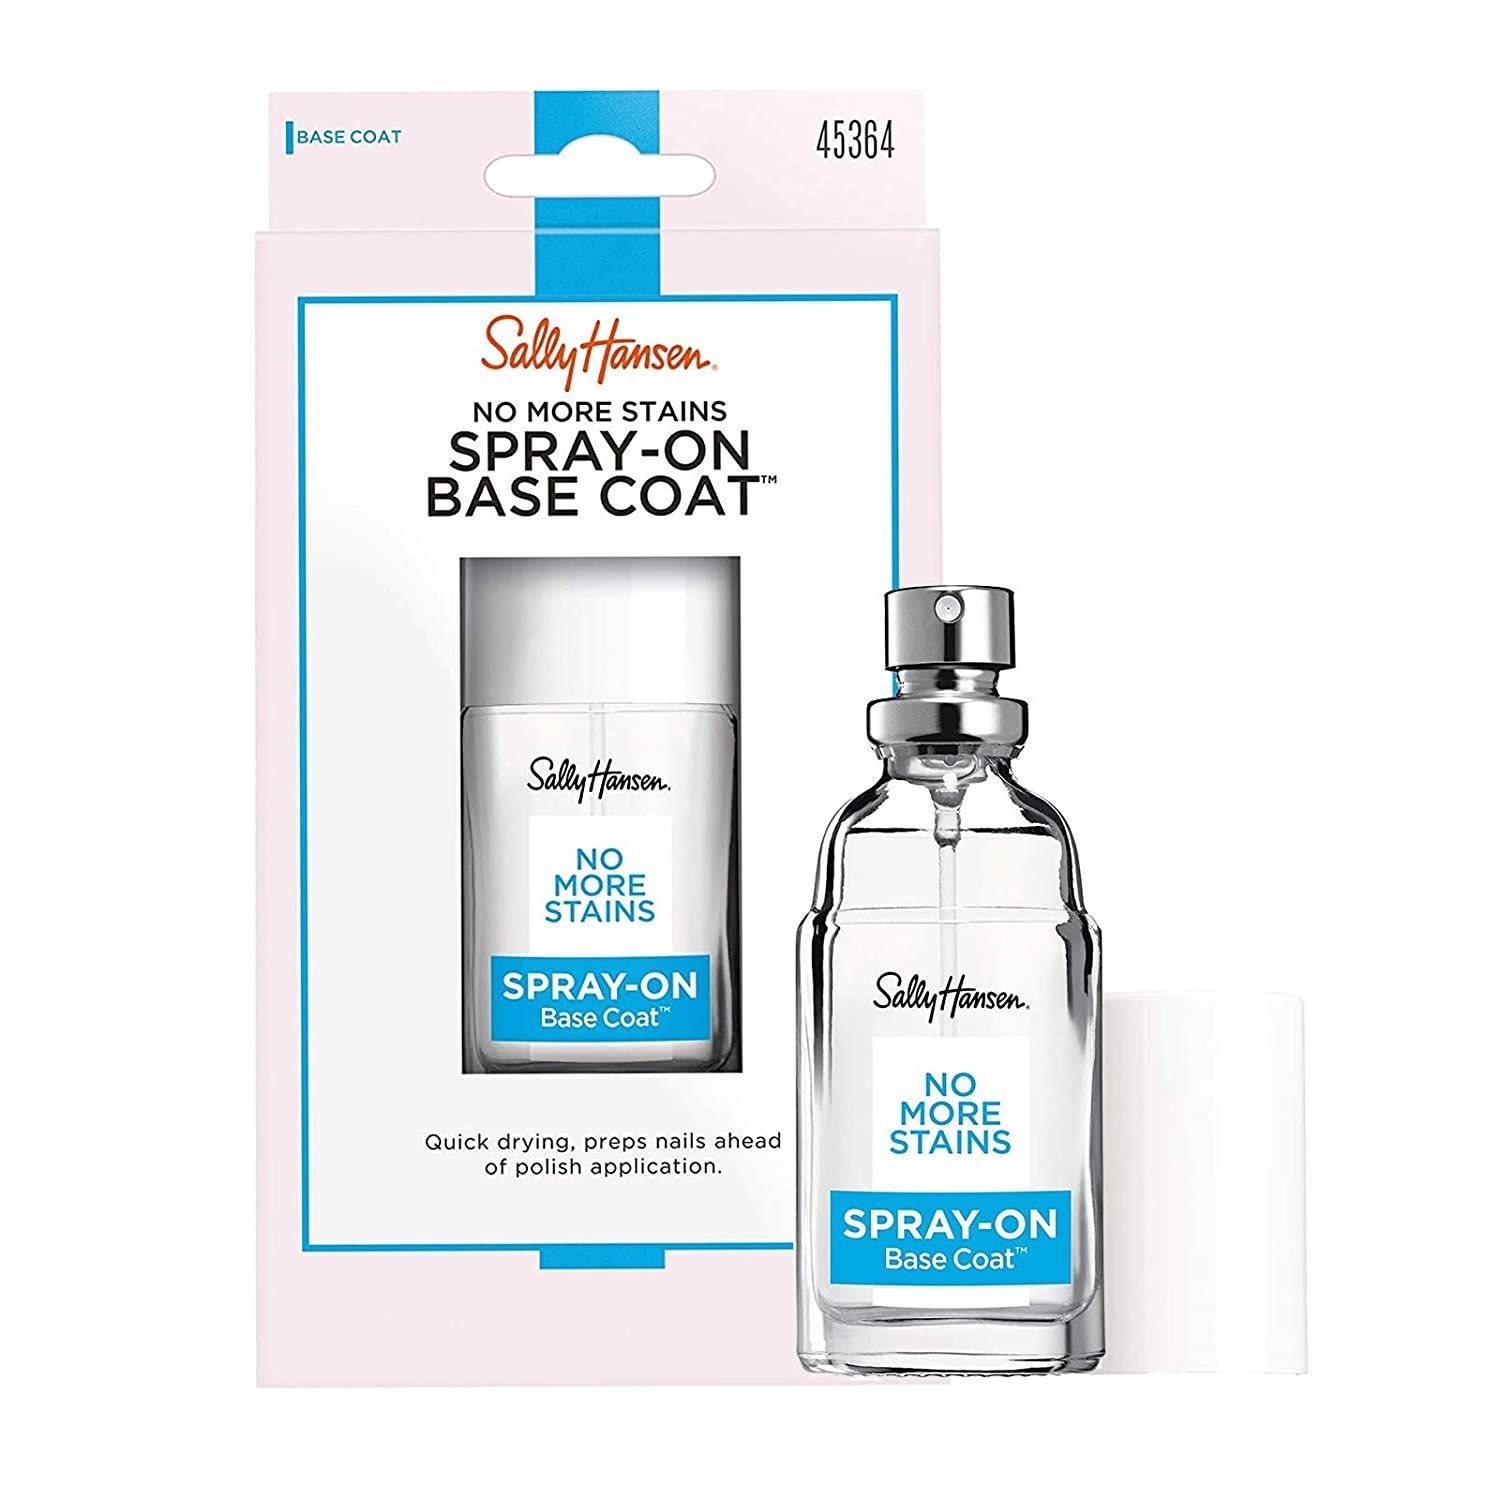 The Sally Hansen No More Stains spray-on base coat.